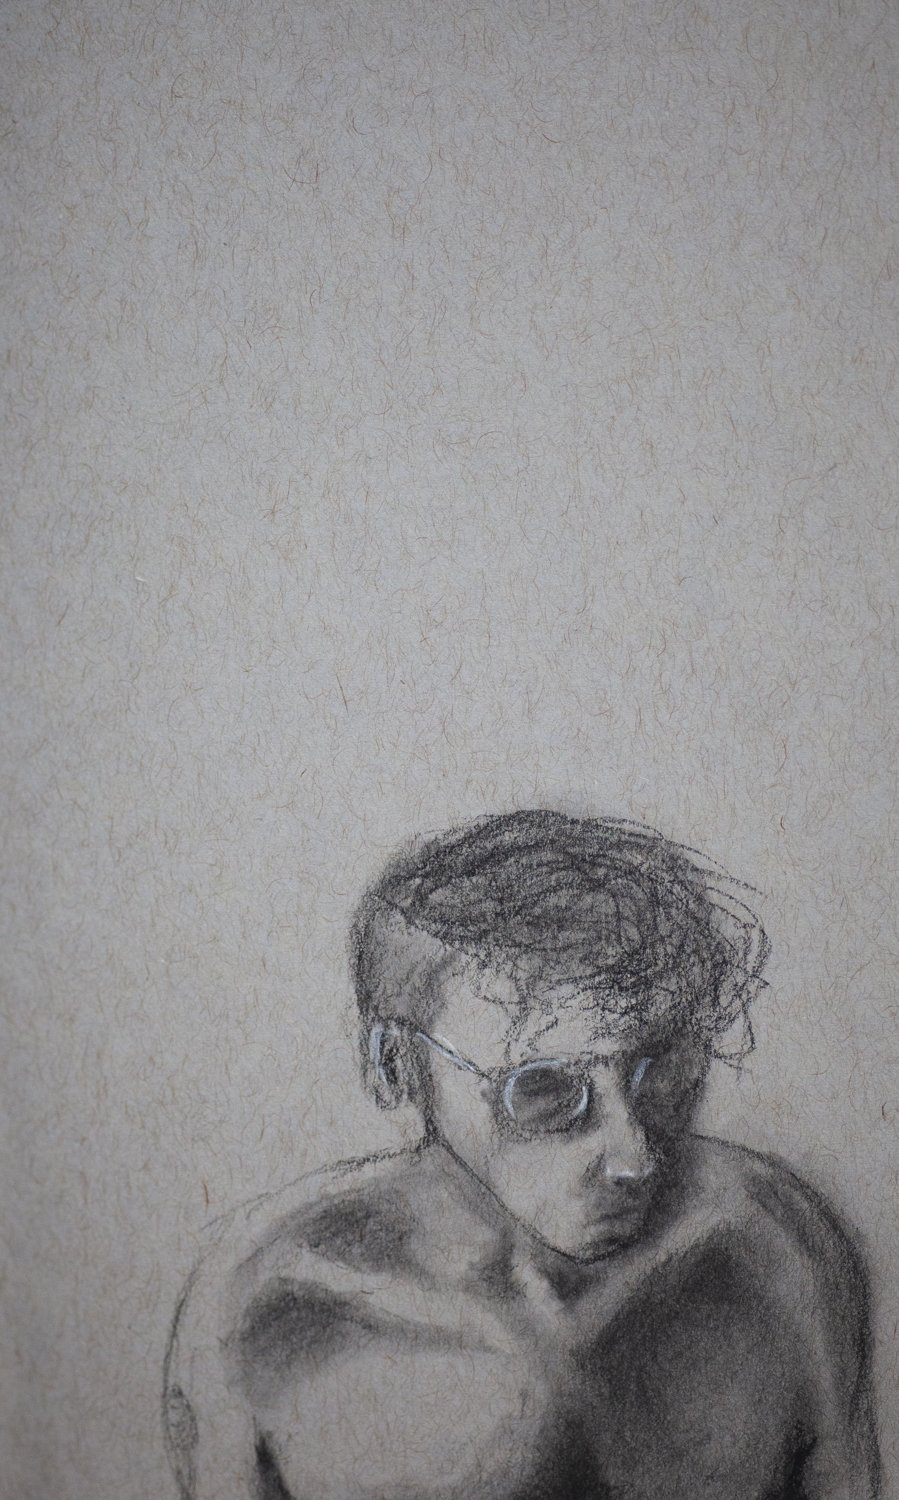   Untitled.       2020. Charcoal on Paper.  5.5 x 8.5 in (14 x 21.6 cm) 